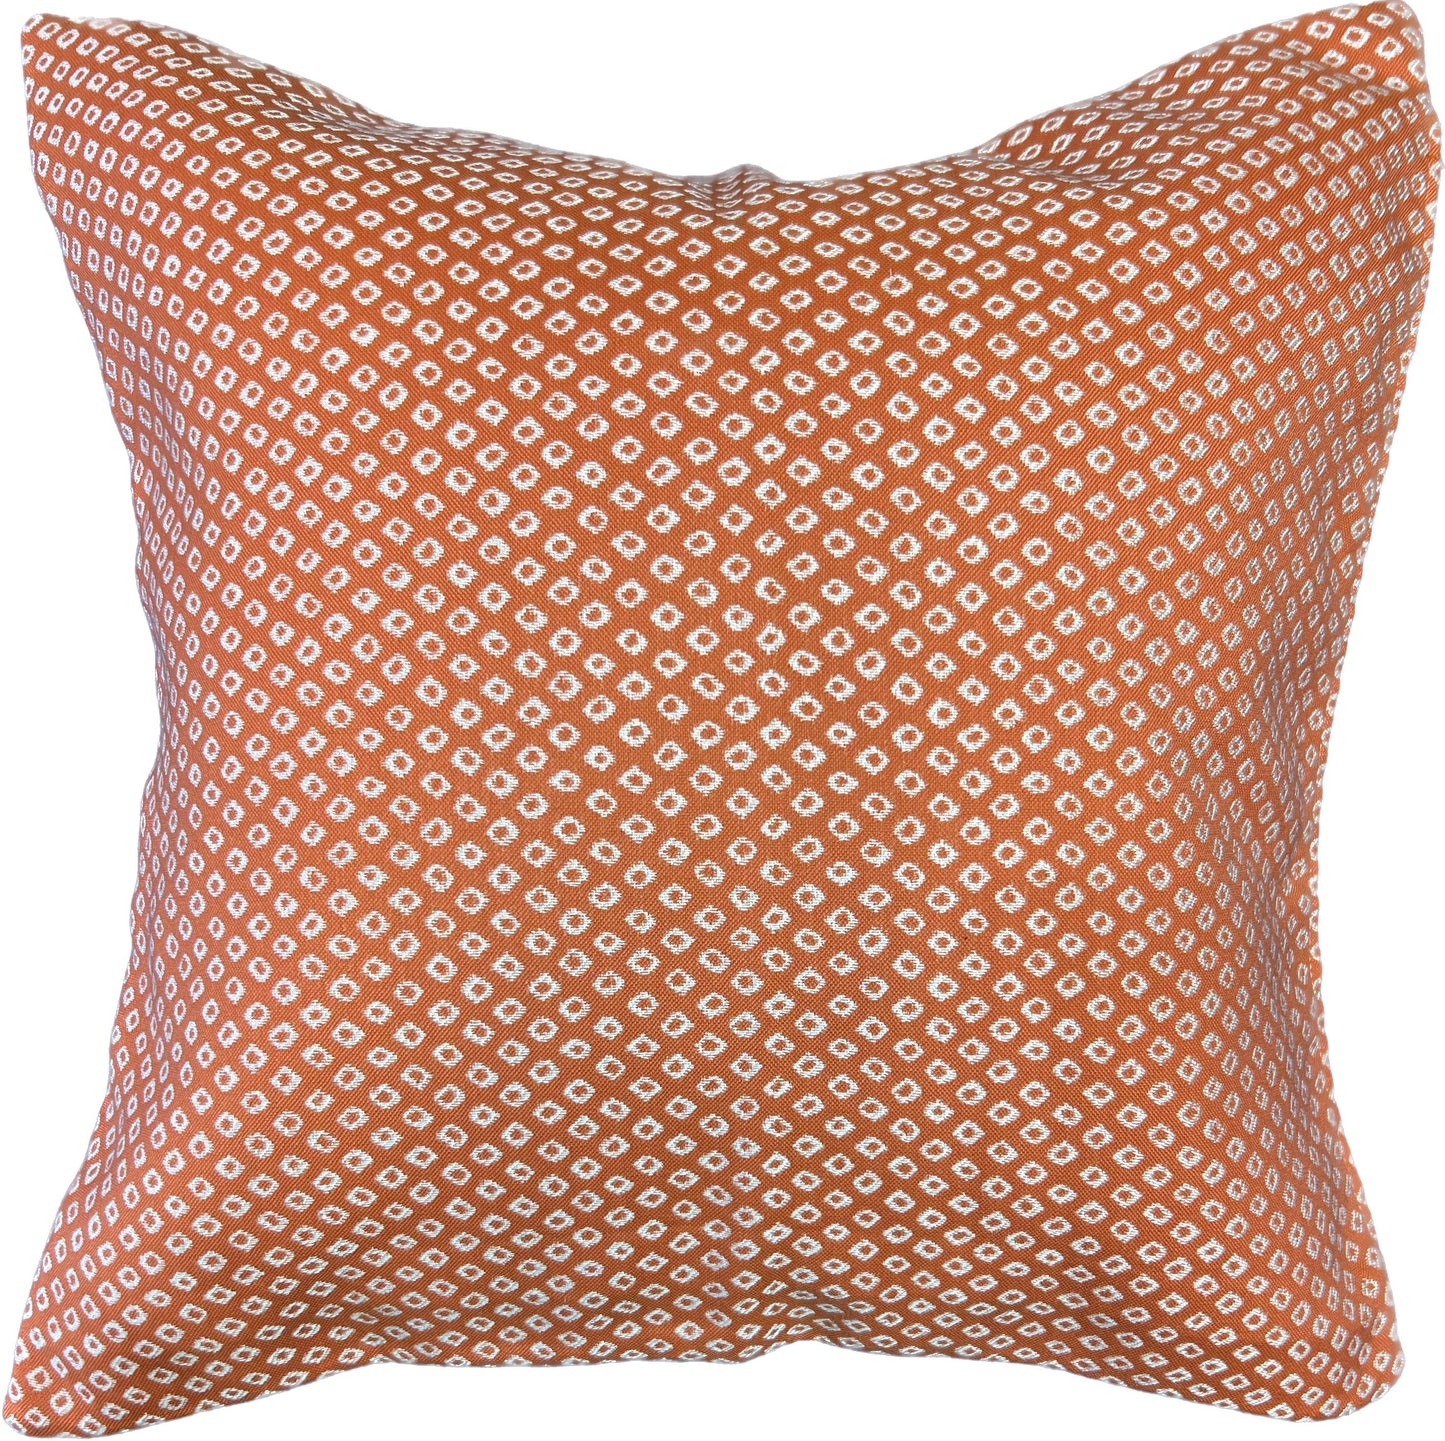 18"x18"  2-sided Pillow Cover - Small dots-woven both sides